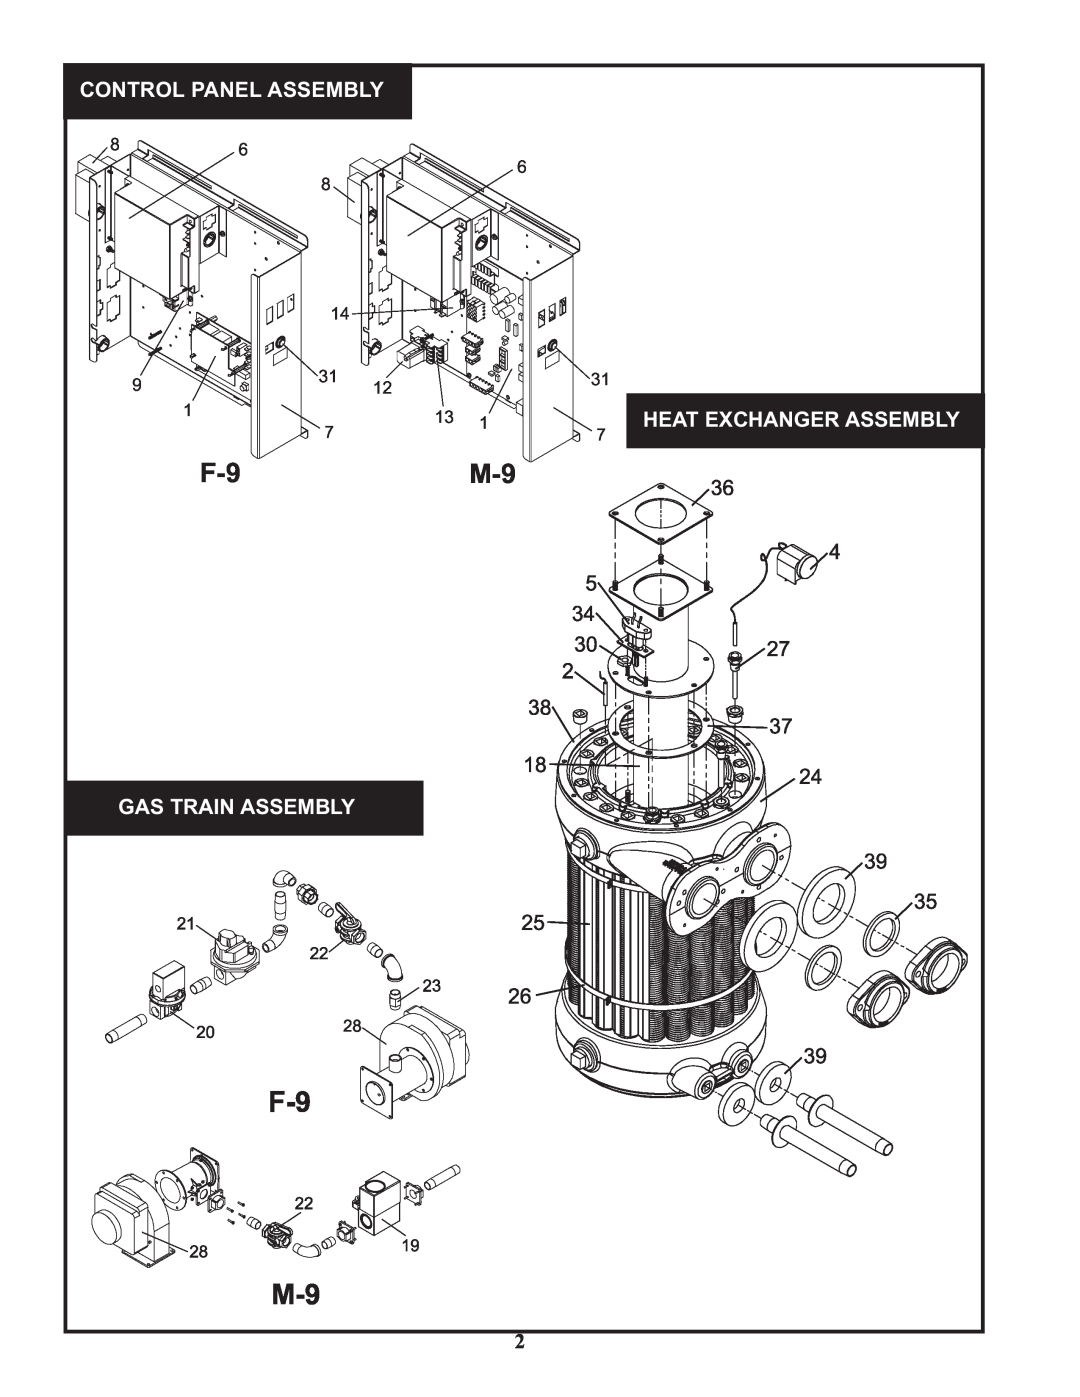 Lochinvar A05H00172528 manual Gas Train Assembly, Control Panel Assembly, Heat Exchanger Assembly 